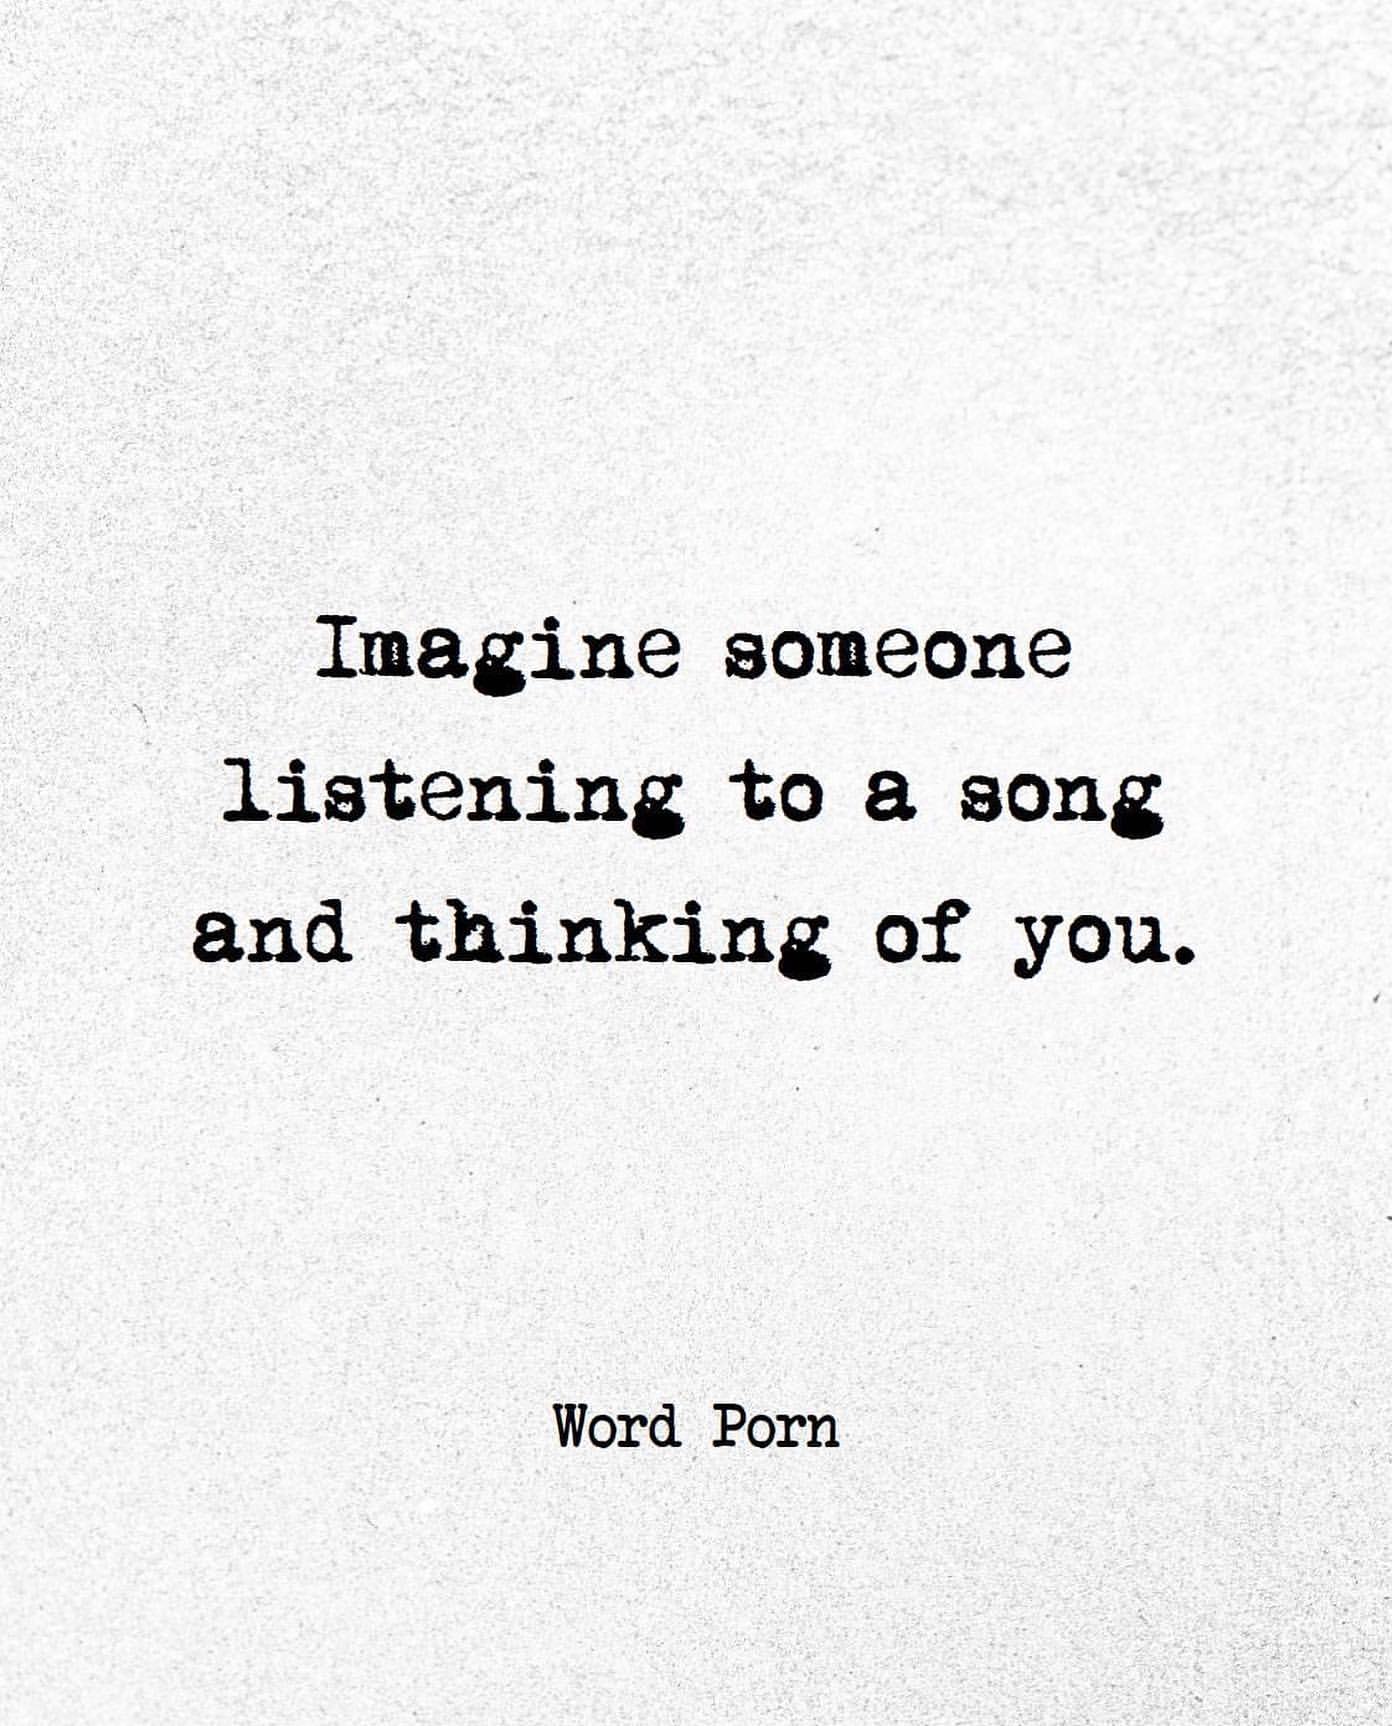 Imagine someone listening to a song and thinking of you.